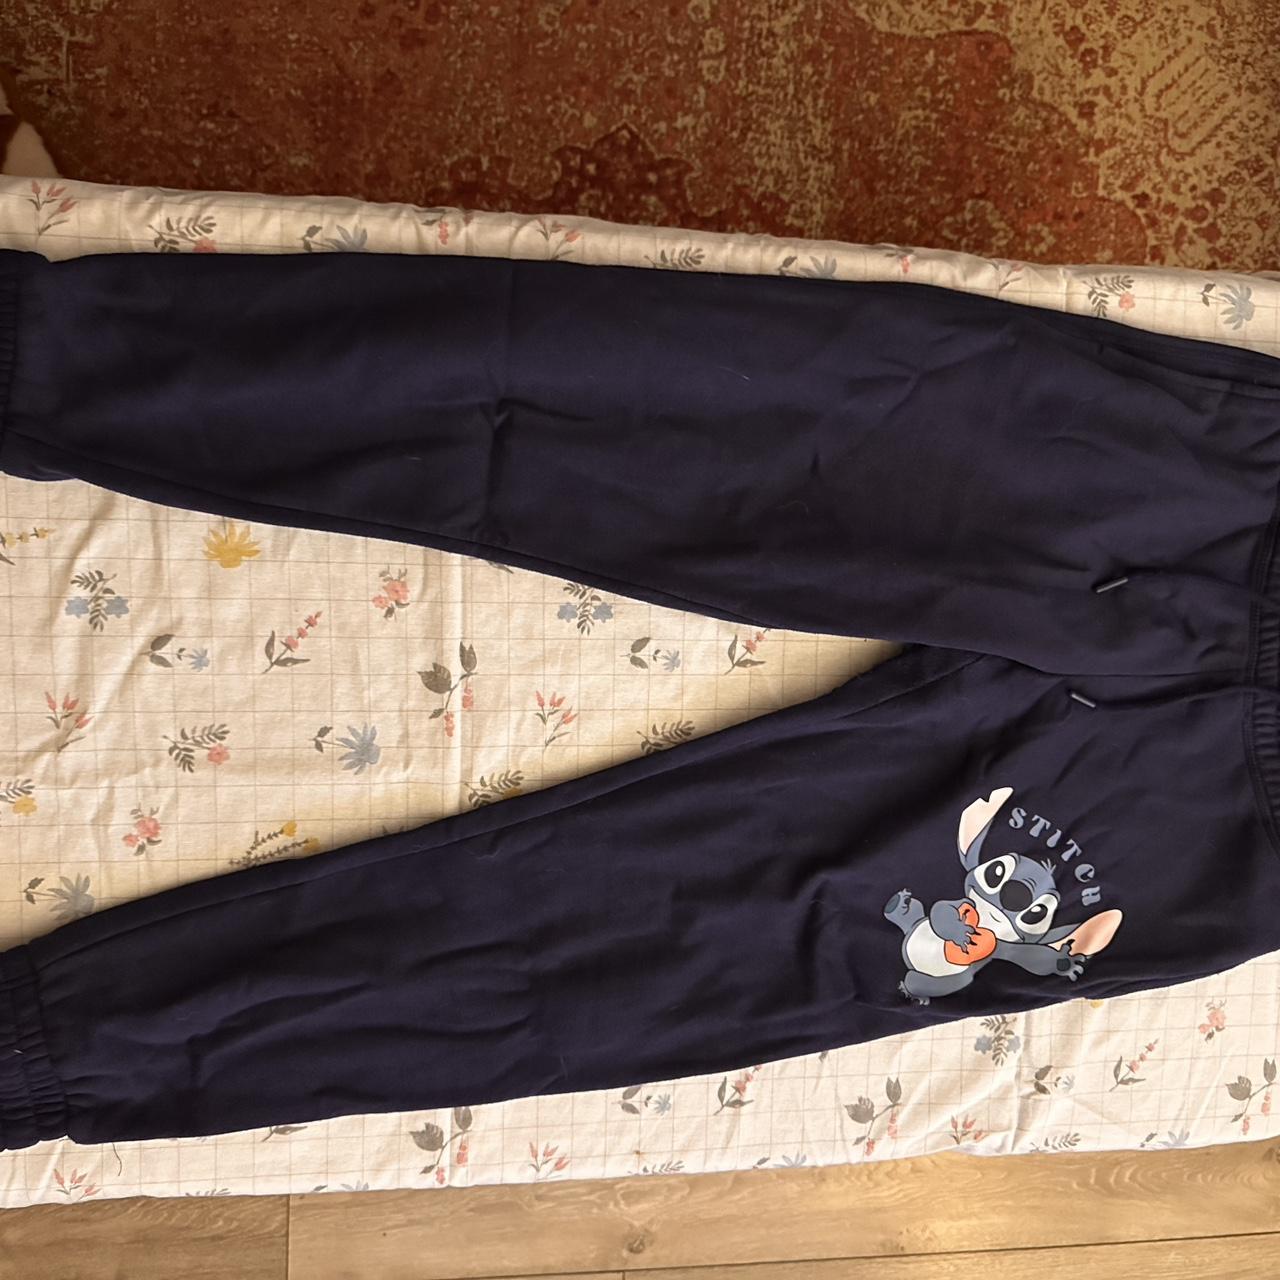 Disney Stitch joggers small size in good condition - Depop